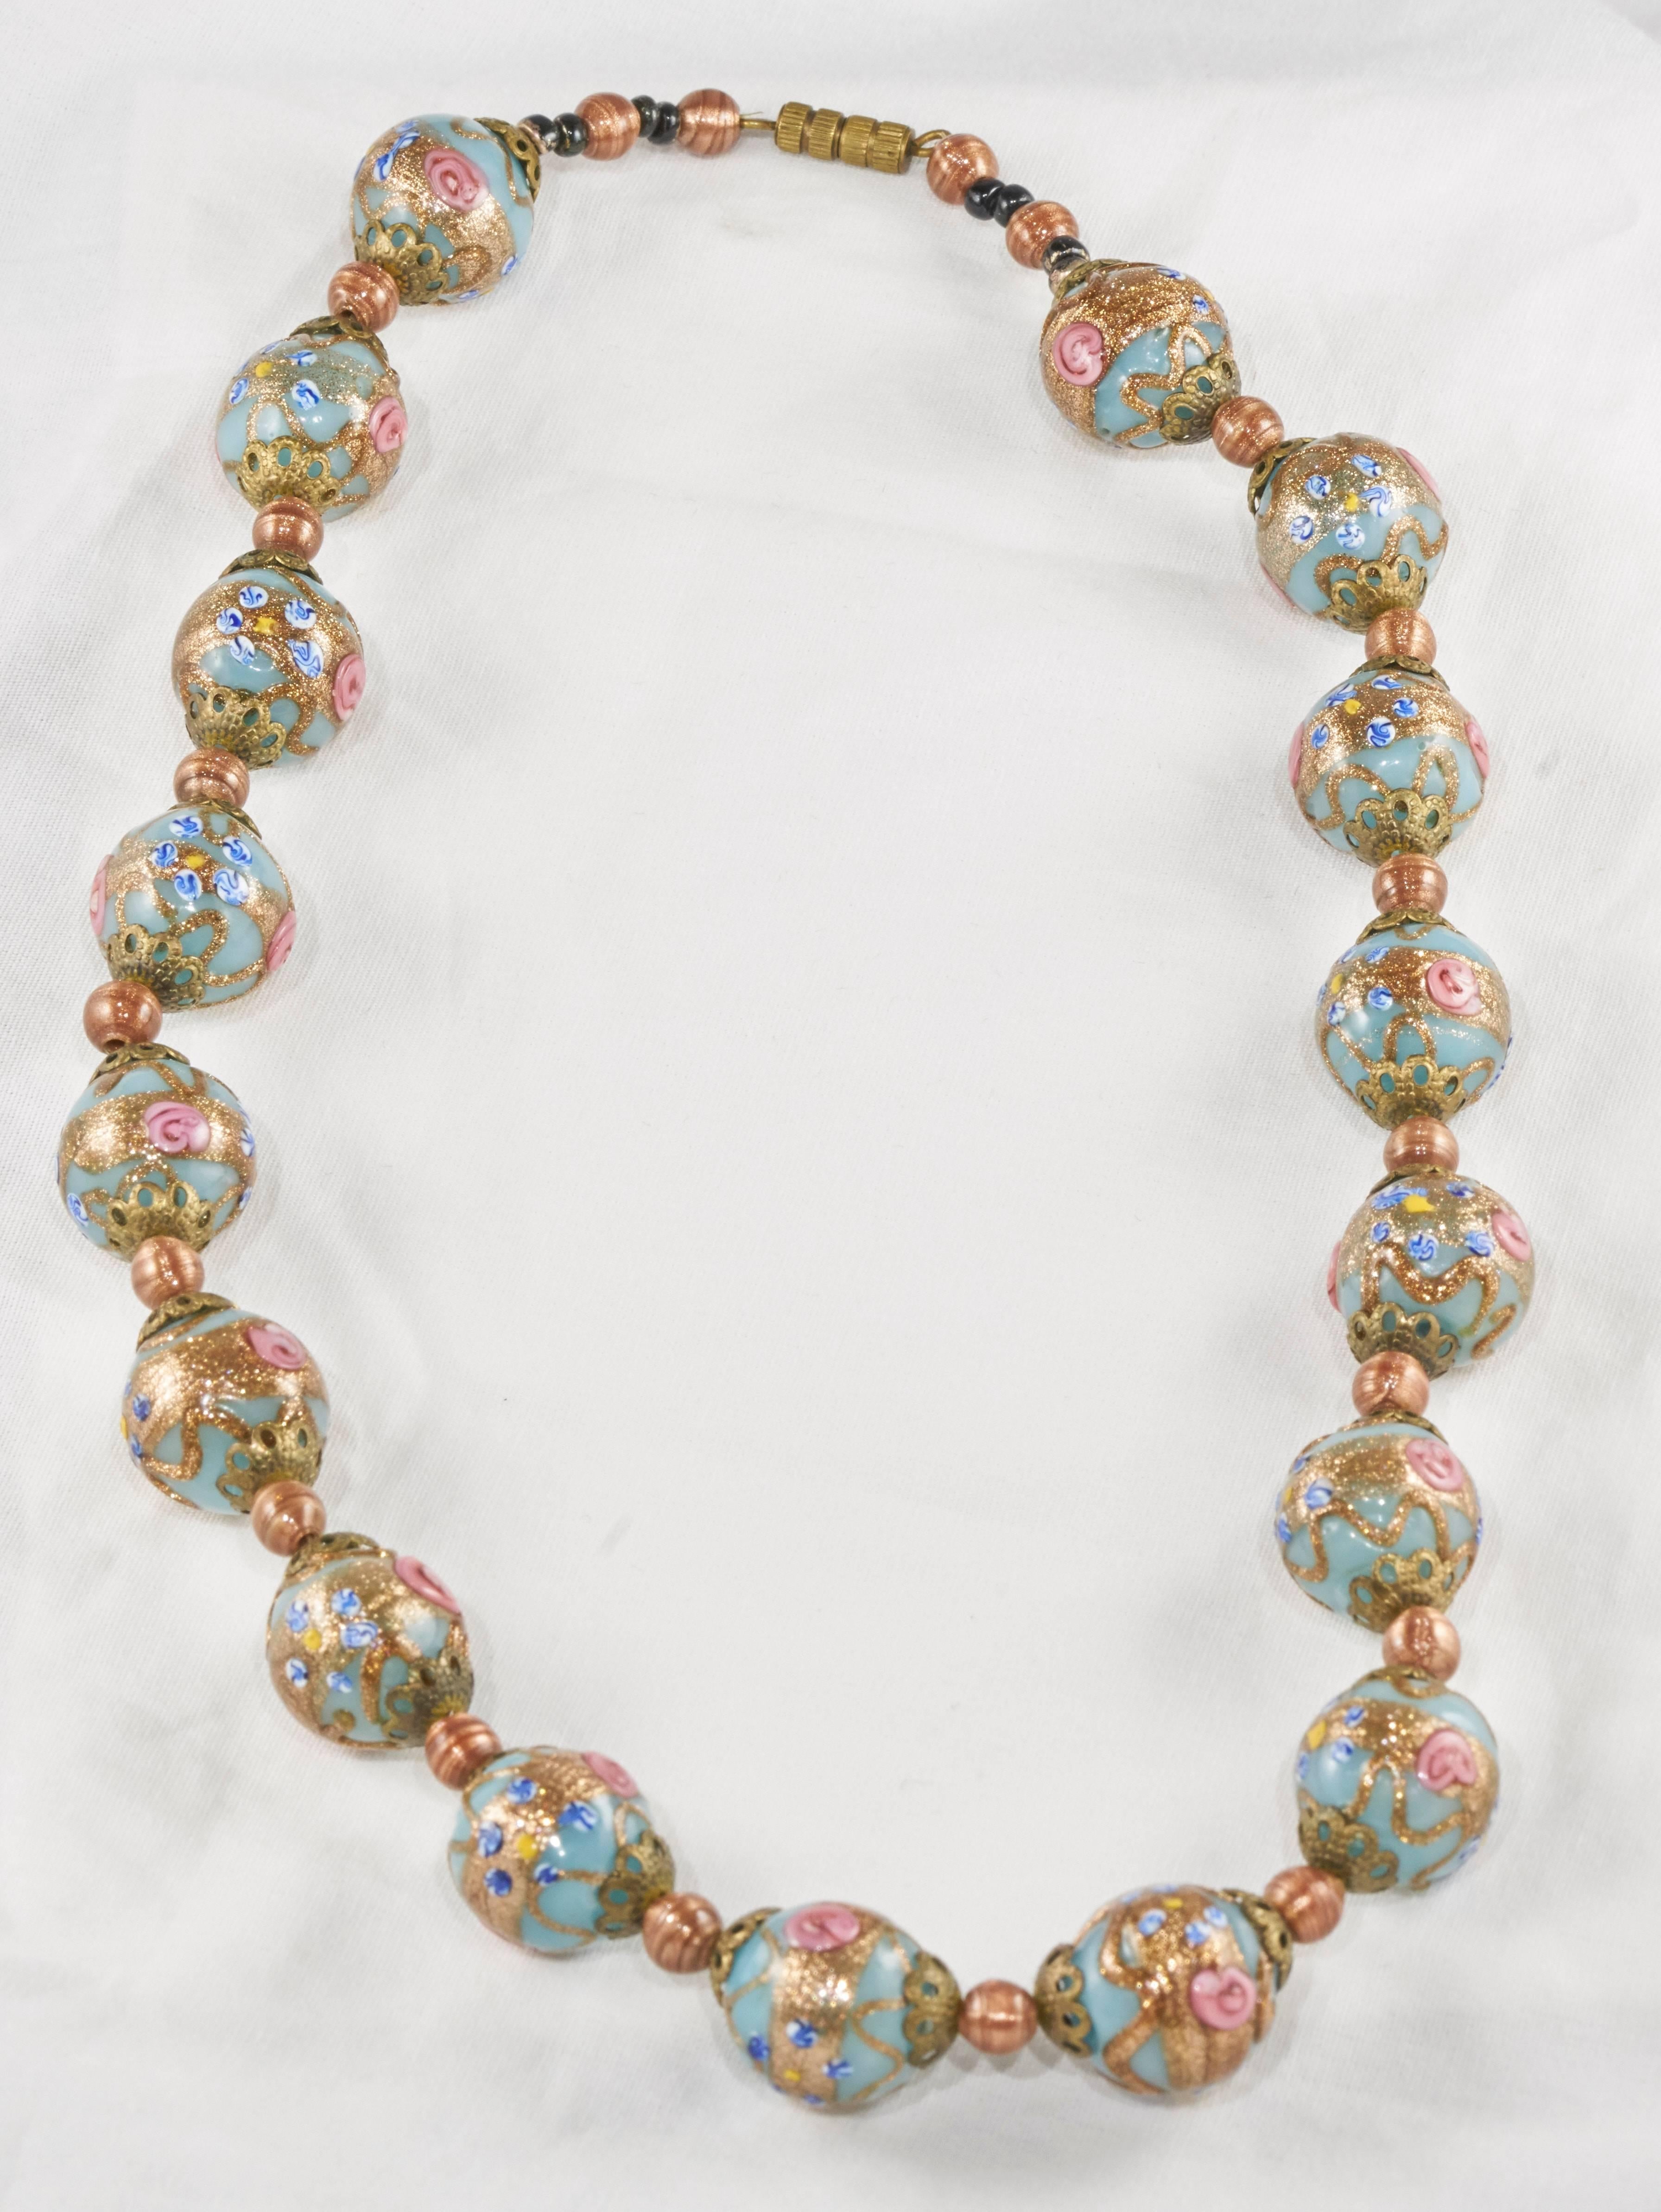 Hollywood Regency Vintage Cloisonne Hand Painted Beautiful Necklace - Artfully Unique.